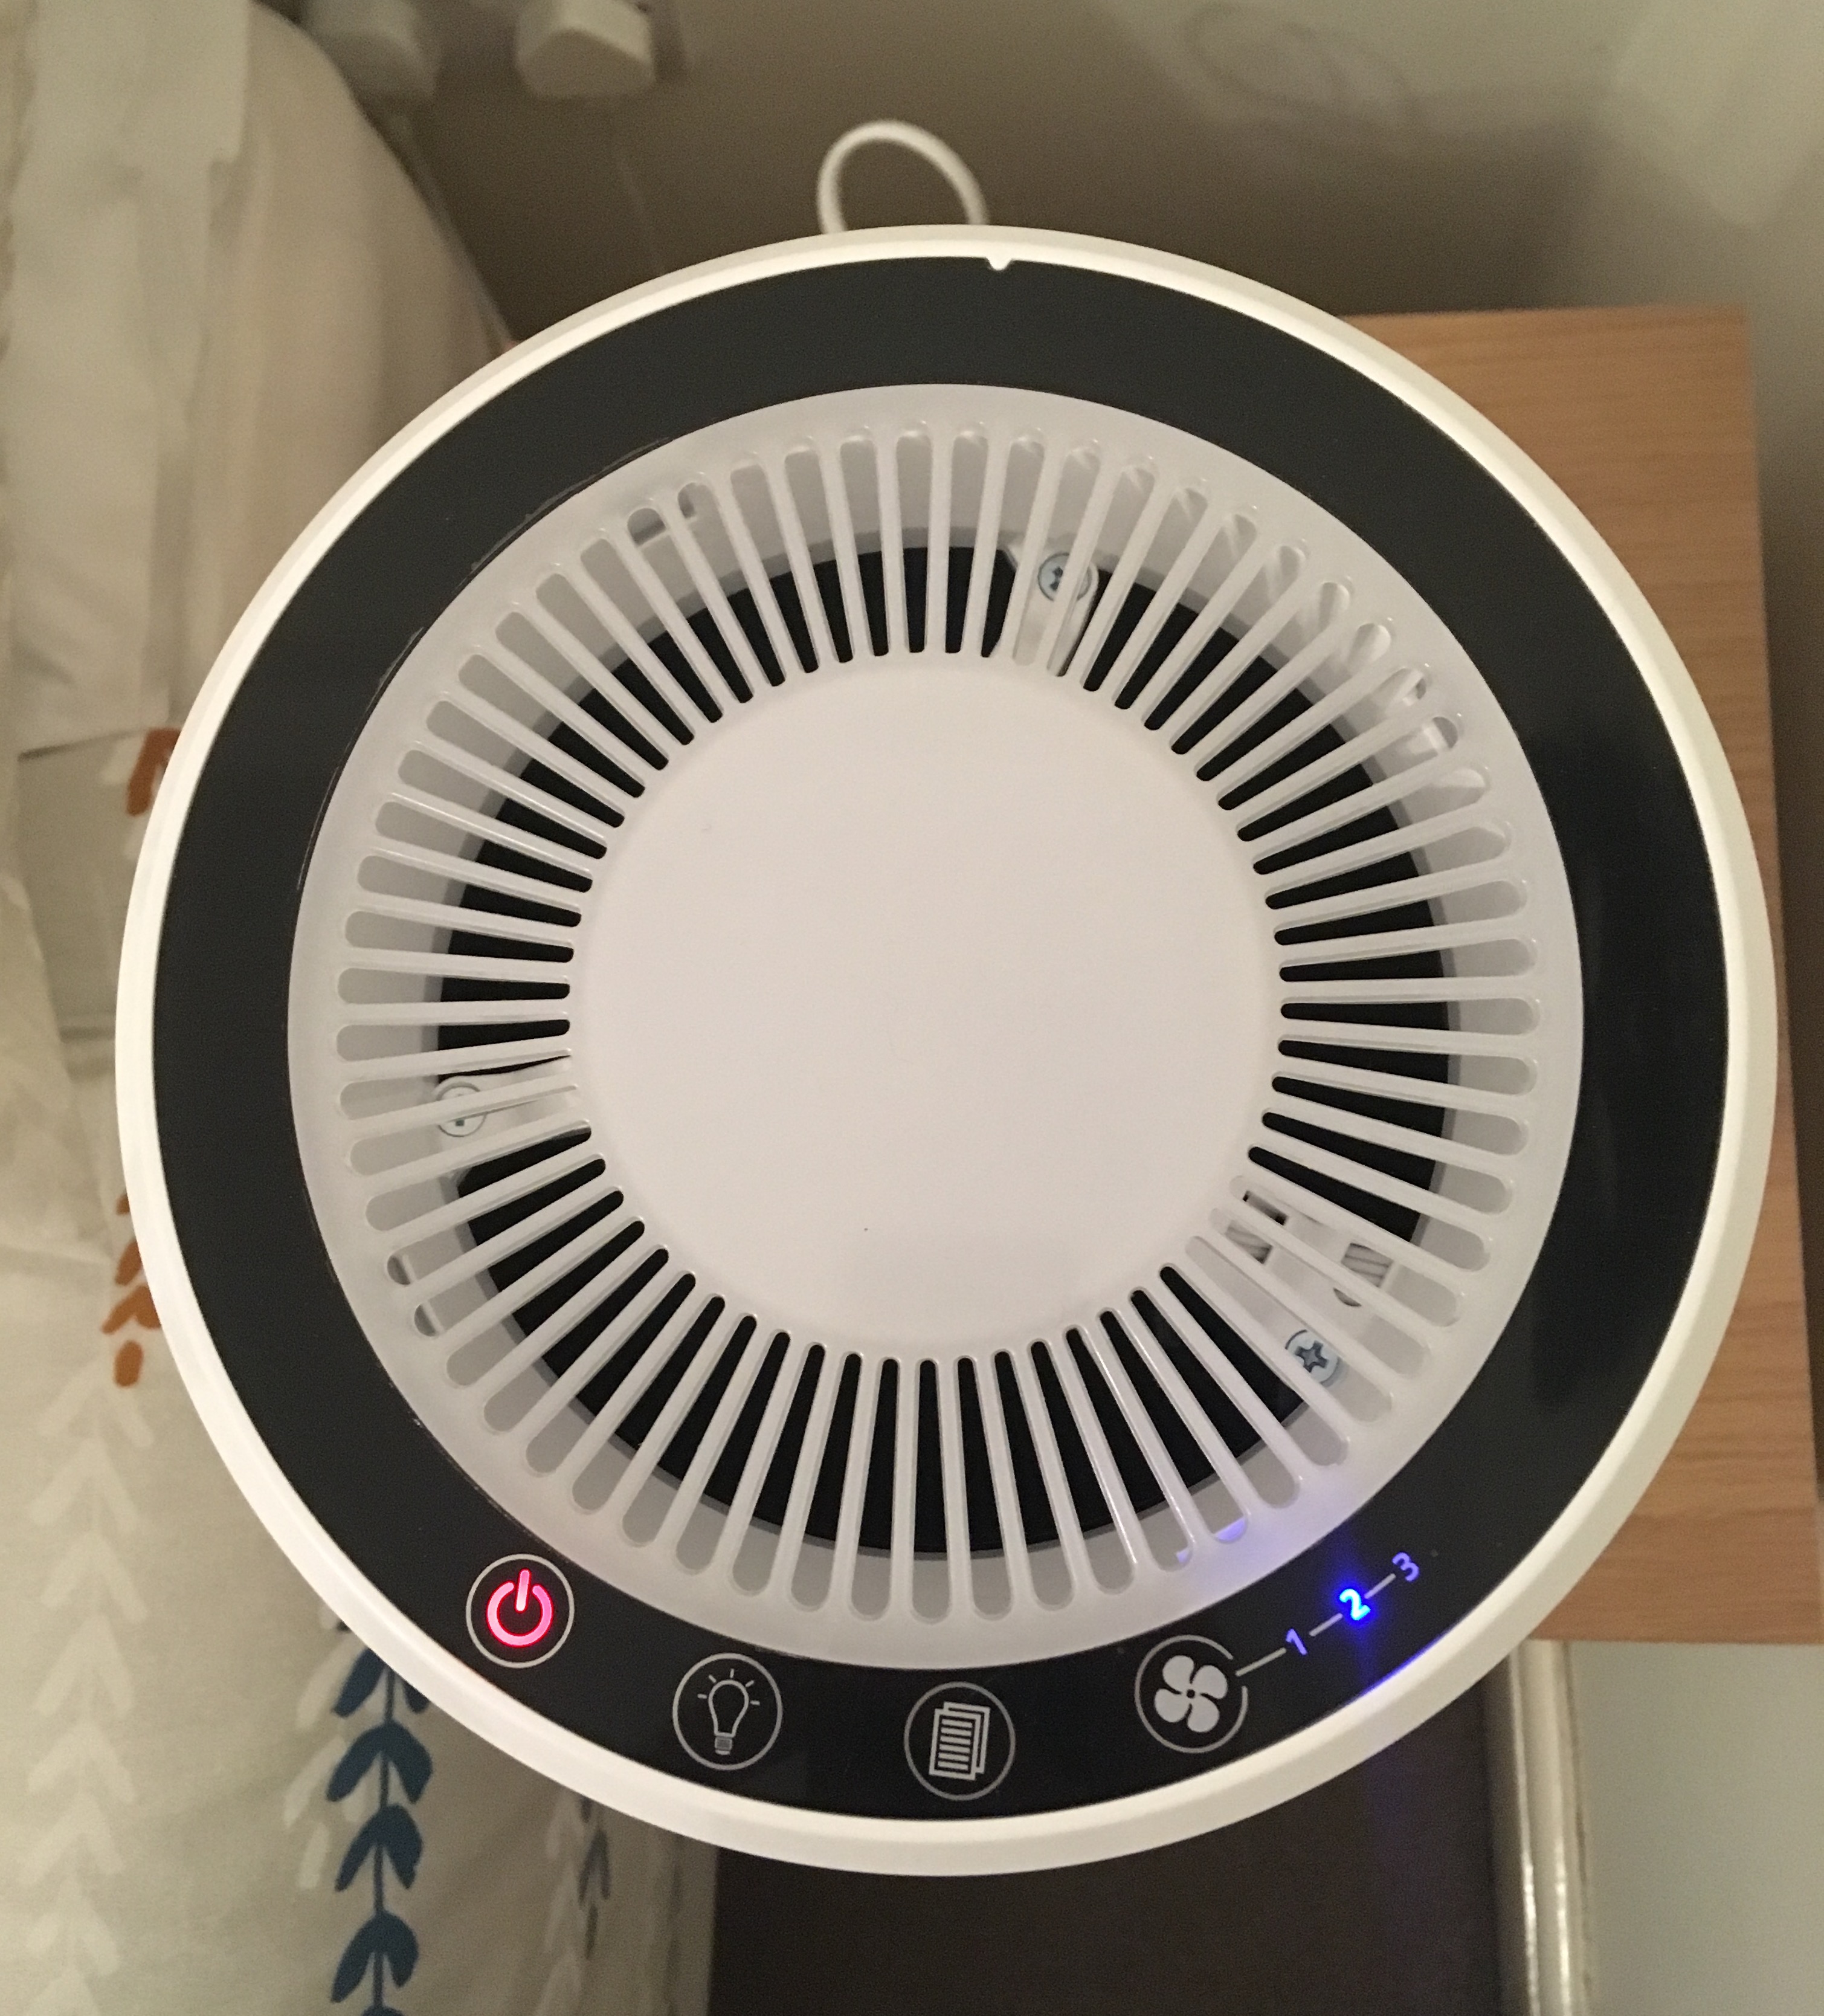 A birds-eye image of the top of the air purifier.